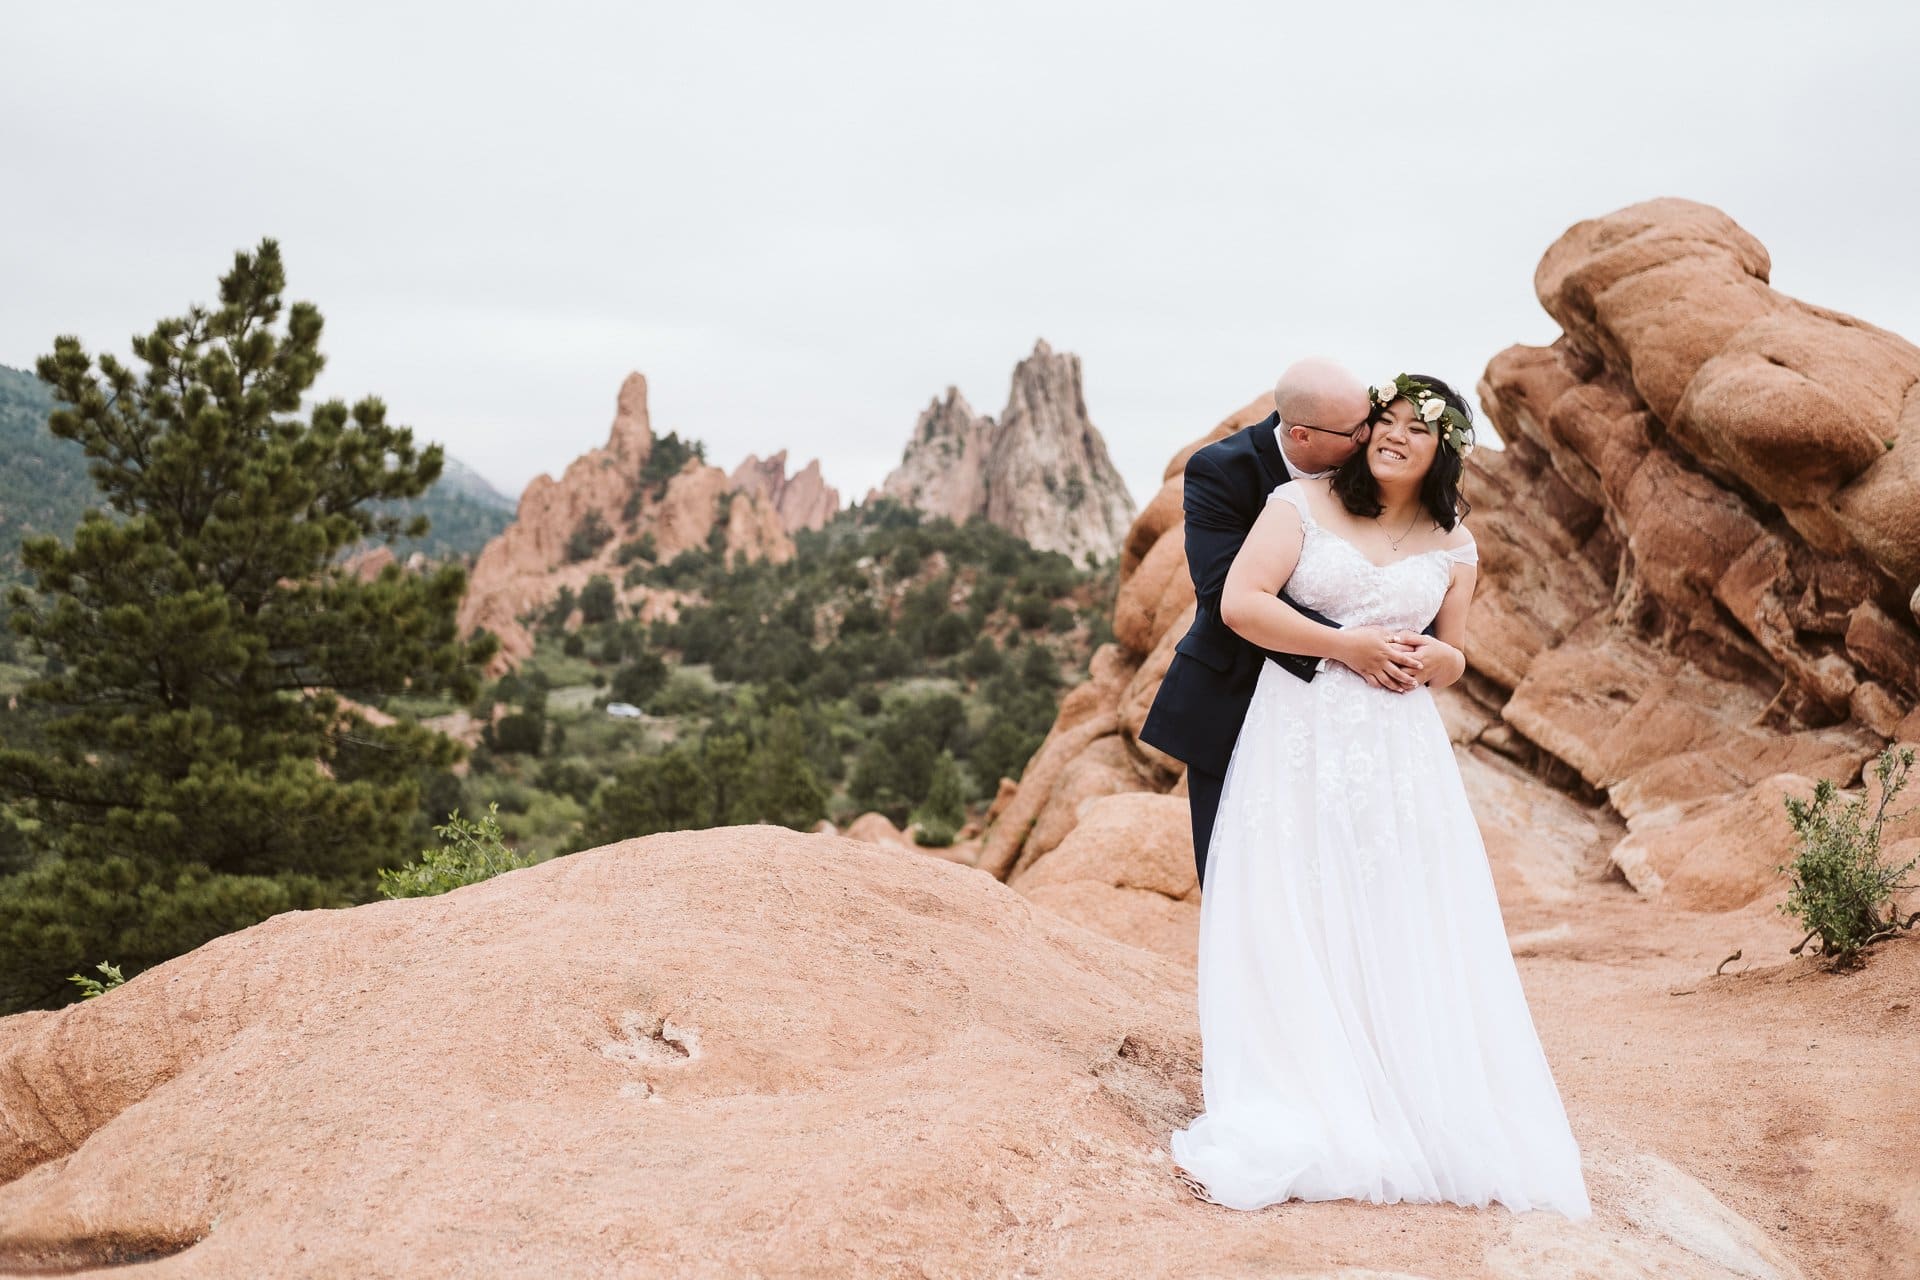 Wedding photos at Garden of the Gods in Colorado Springs with red rocks and desert vibes